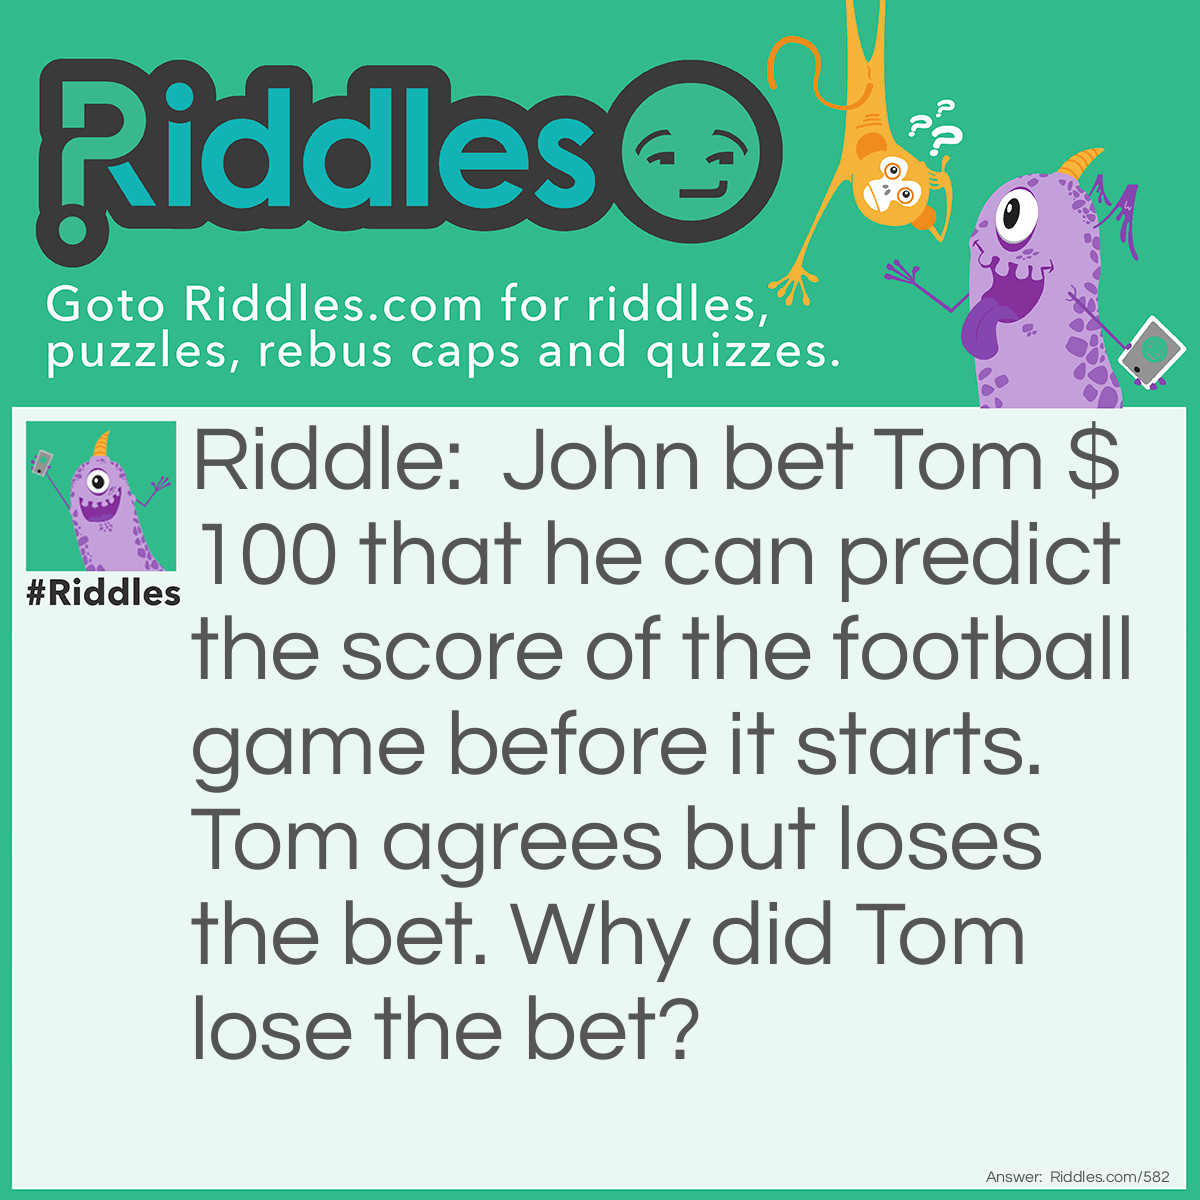 Riddle: John bet Tom $100 that he can predict the score of the football game before it starts. Tom agrees but loses the bet. Why did Tom lose the bet? Answer: John said the score would be 0-0 and he was right. "Before" any football game starts, the score is always 0-0.